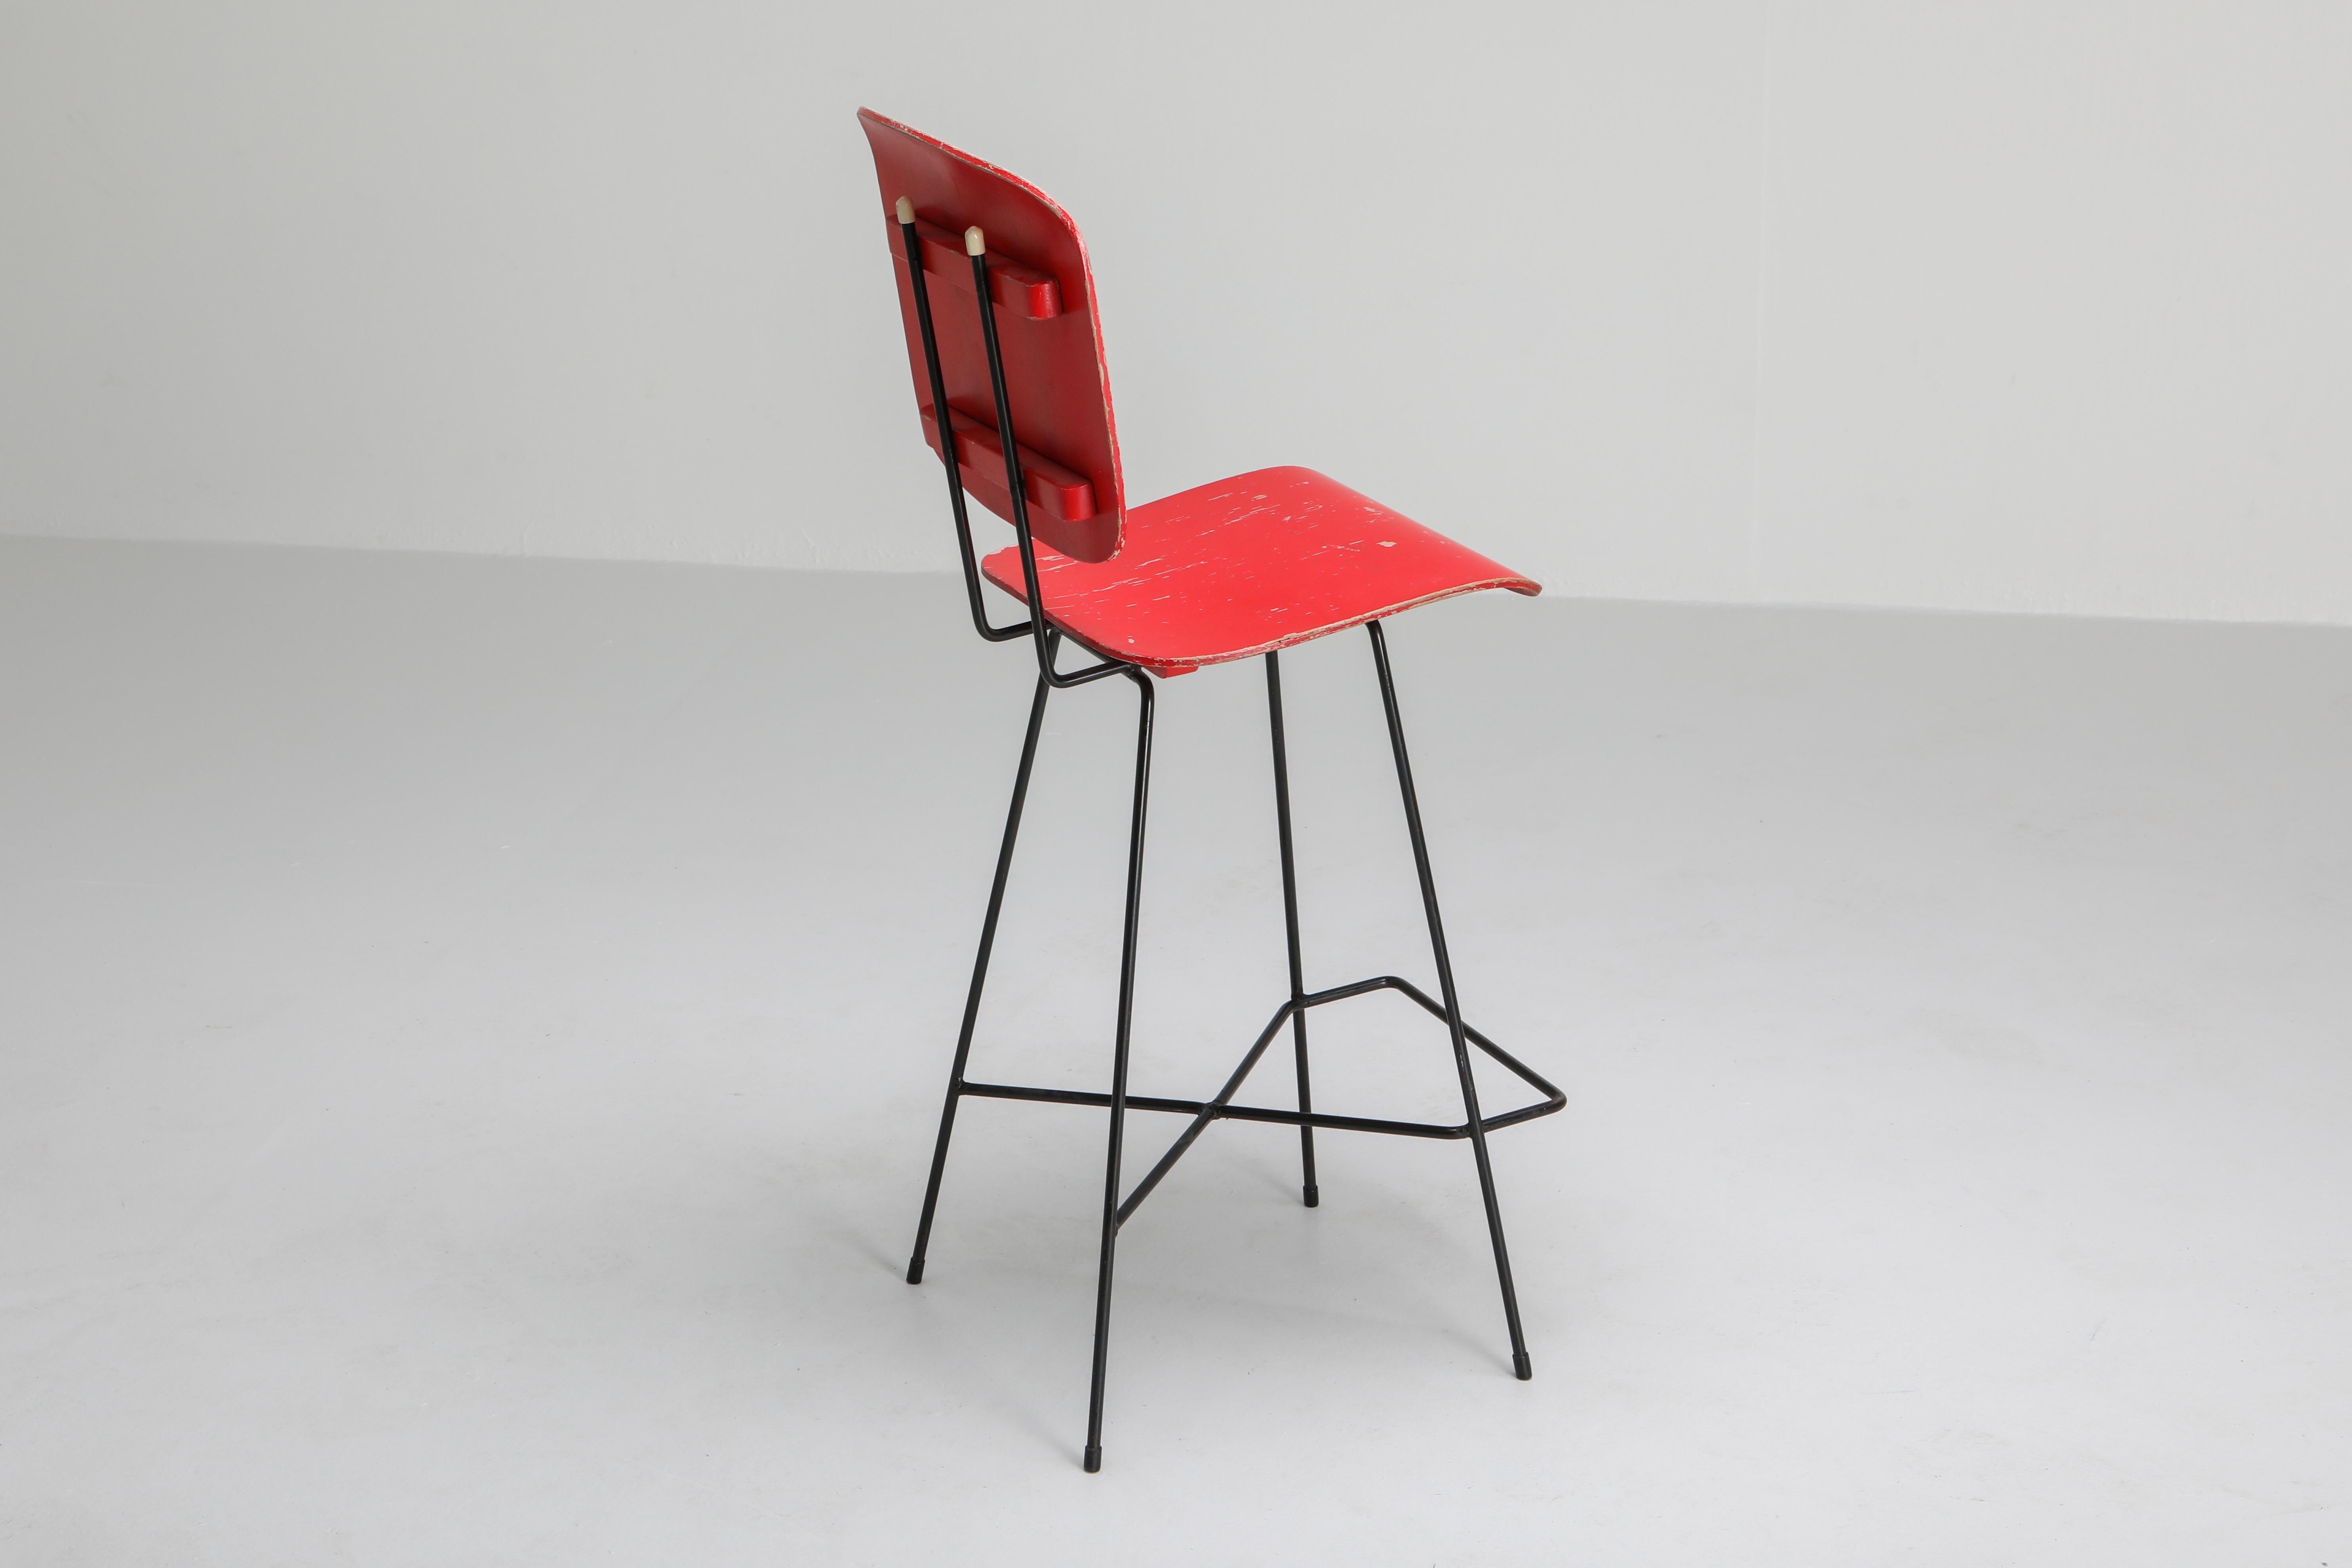 Bar stool, Coen de Vries for Everest Rotterdam, original red patina, Netherlands, 1950s
Dutch modernist piece from the Rietveld, Friso Kramer era.
Black lacquered metal frame, red patina plywood seating.
In amazing original condition.
 